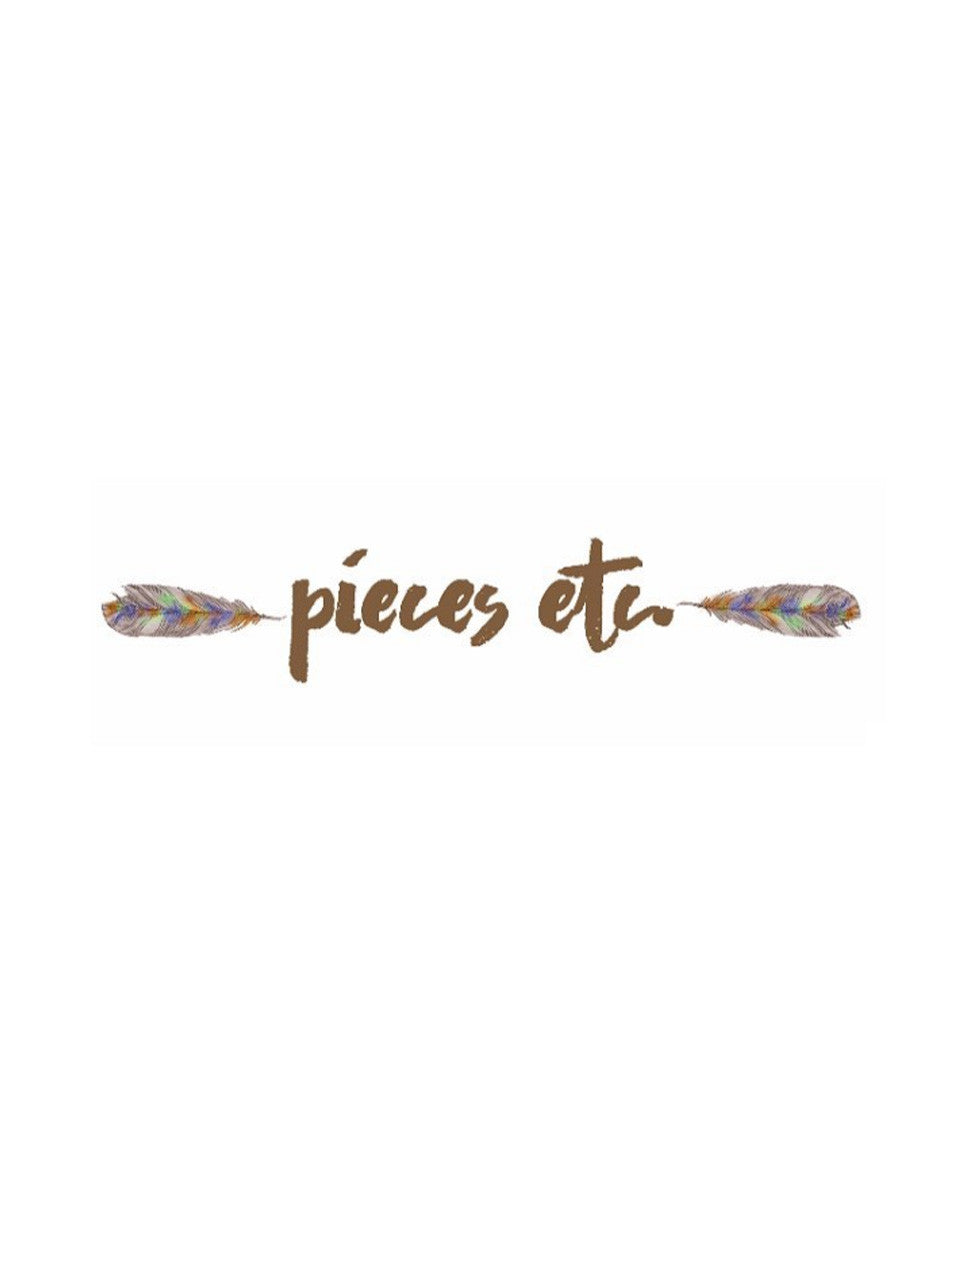 Pieces Etc. by Dianne Price